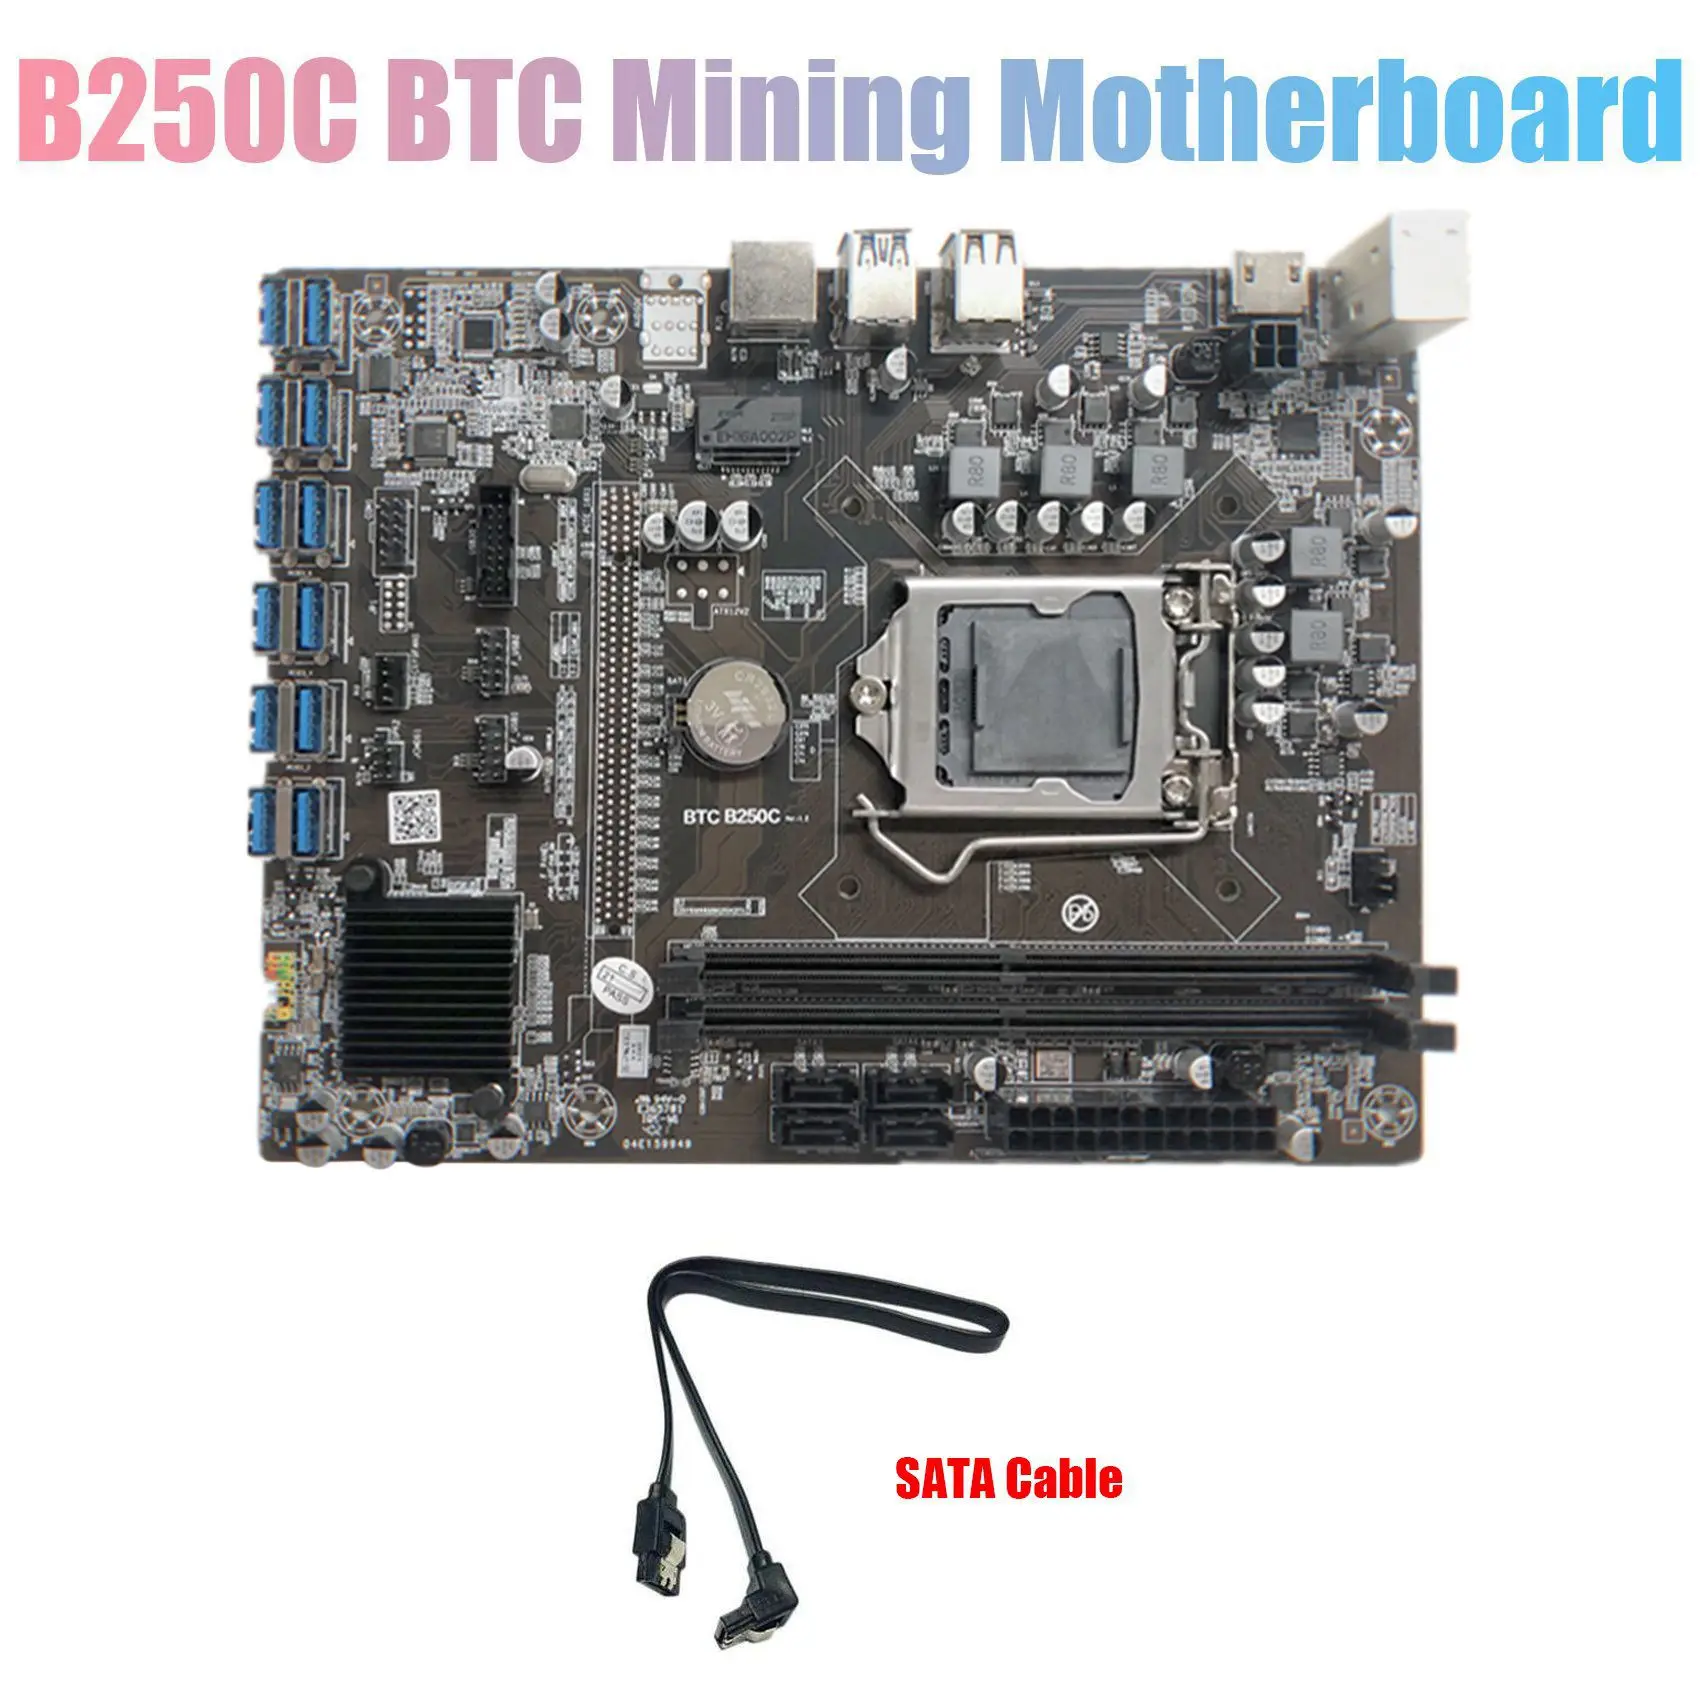 

B250C BTC Mining Motherboard With SATA Cable 12XPCIE To USB3.0 Graphics Card Slot LGA1151 Supports DDR4 DIMM RAM For BTC